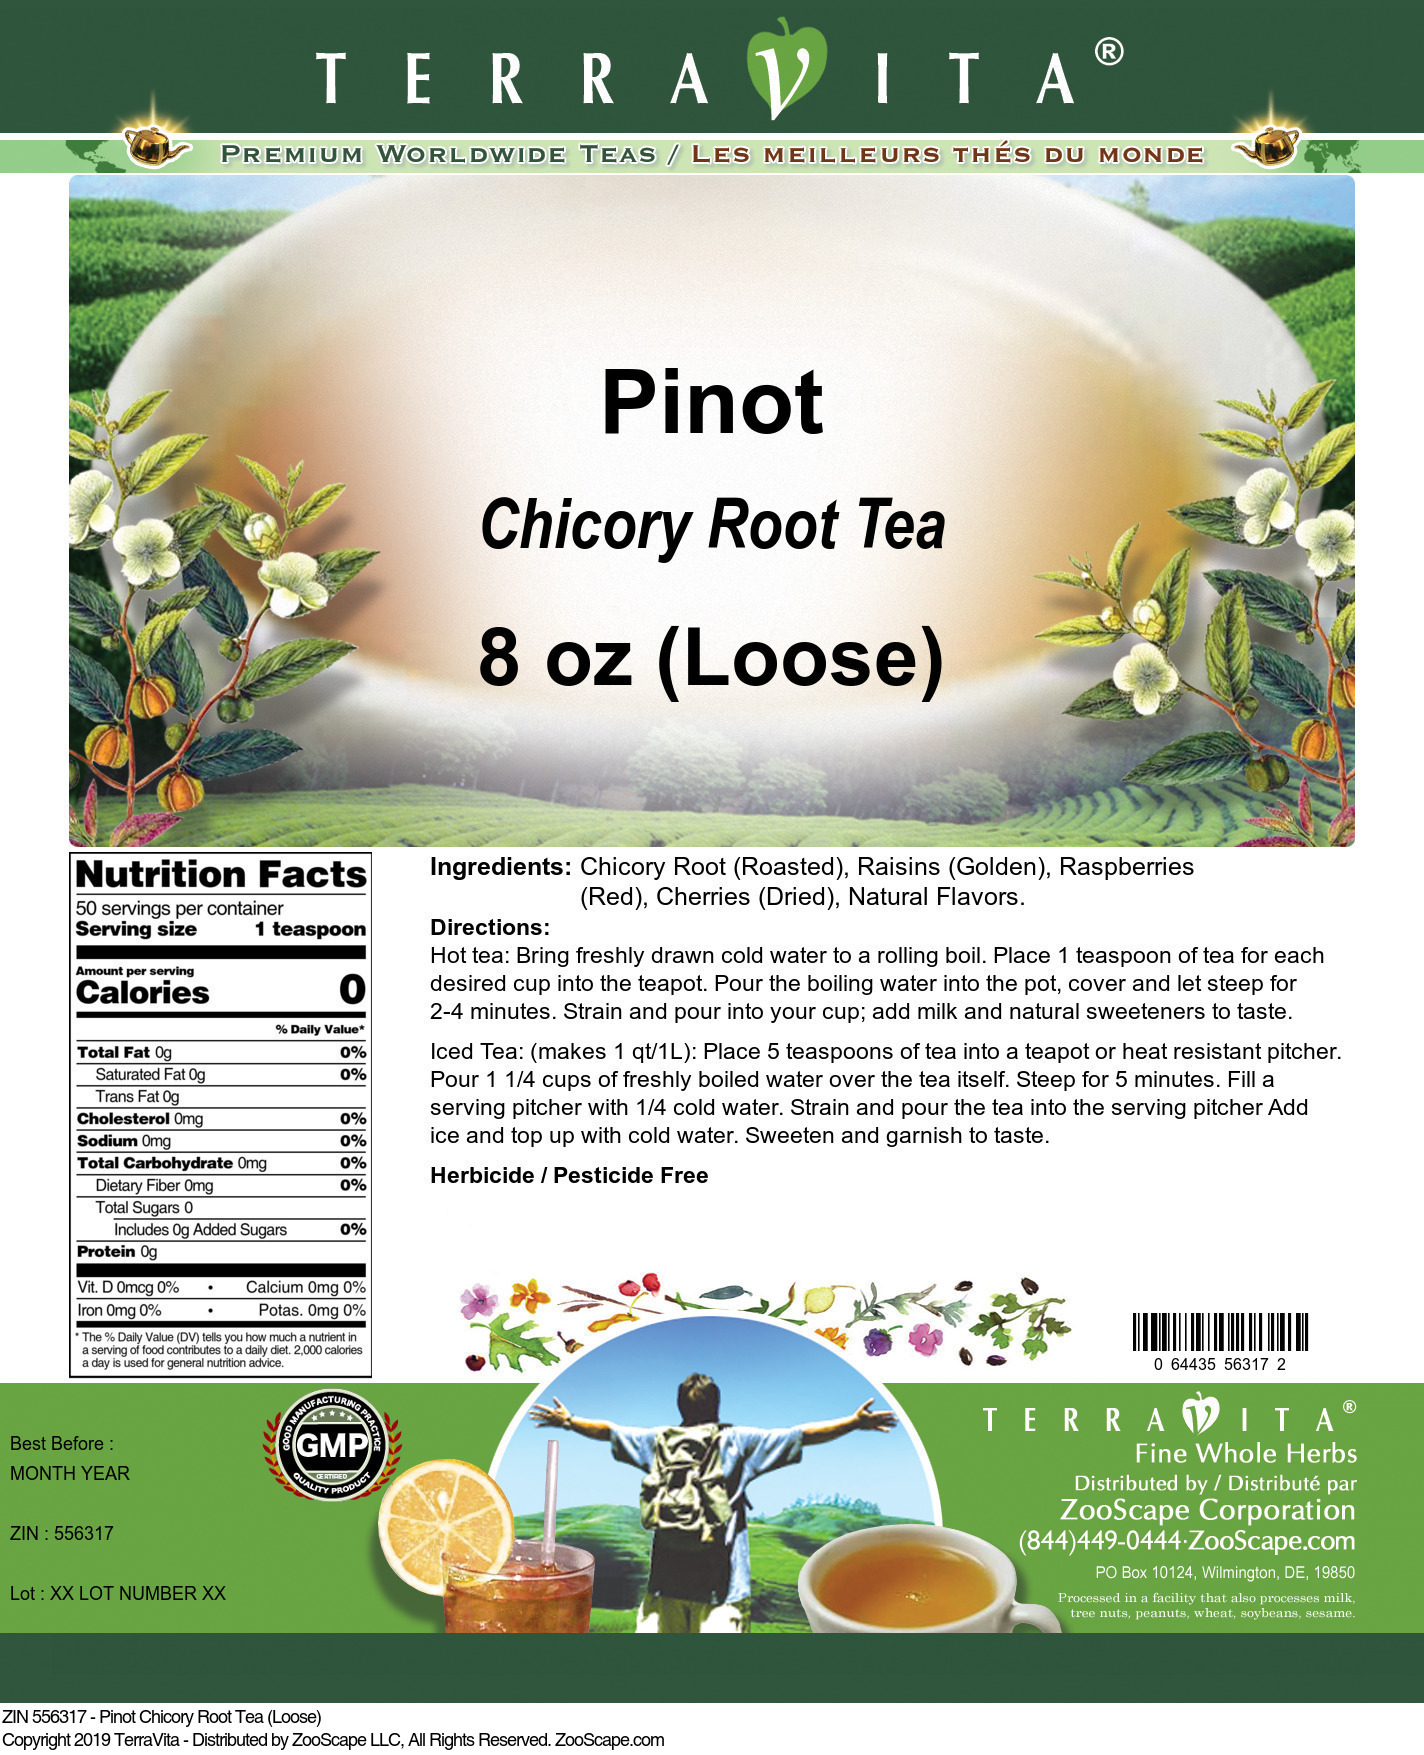 Pinot Chicory Root Tea (Loose) - Label